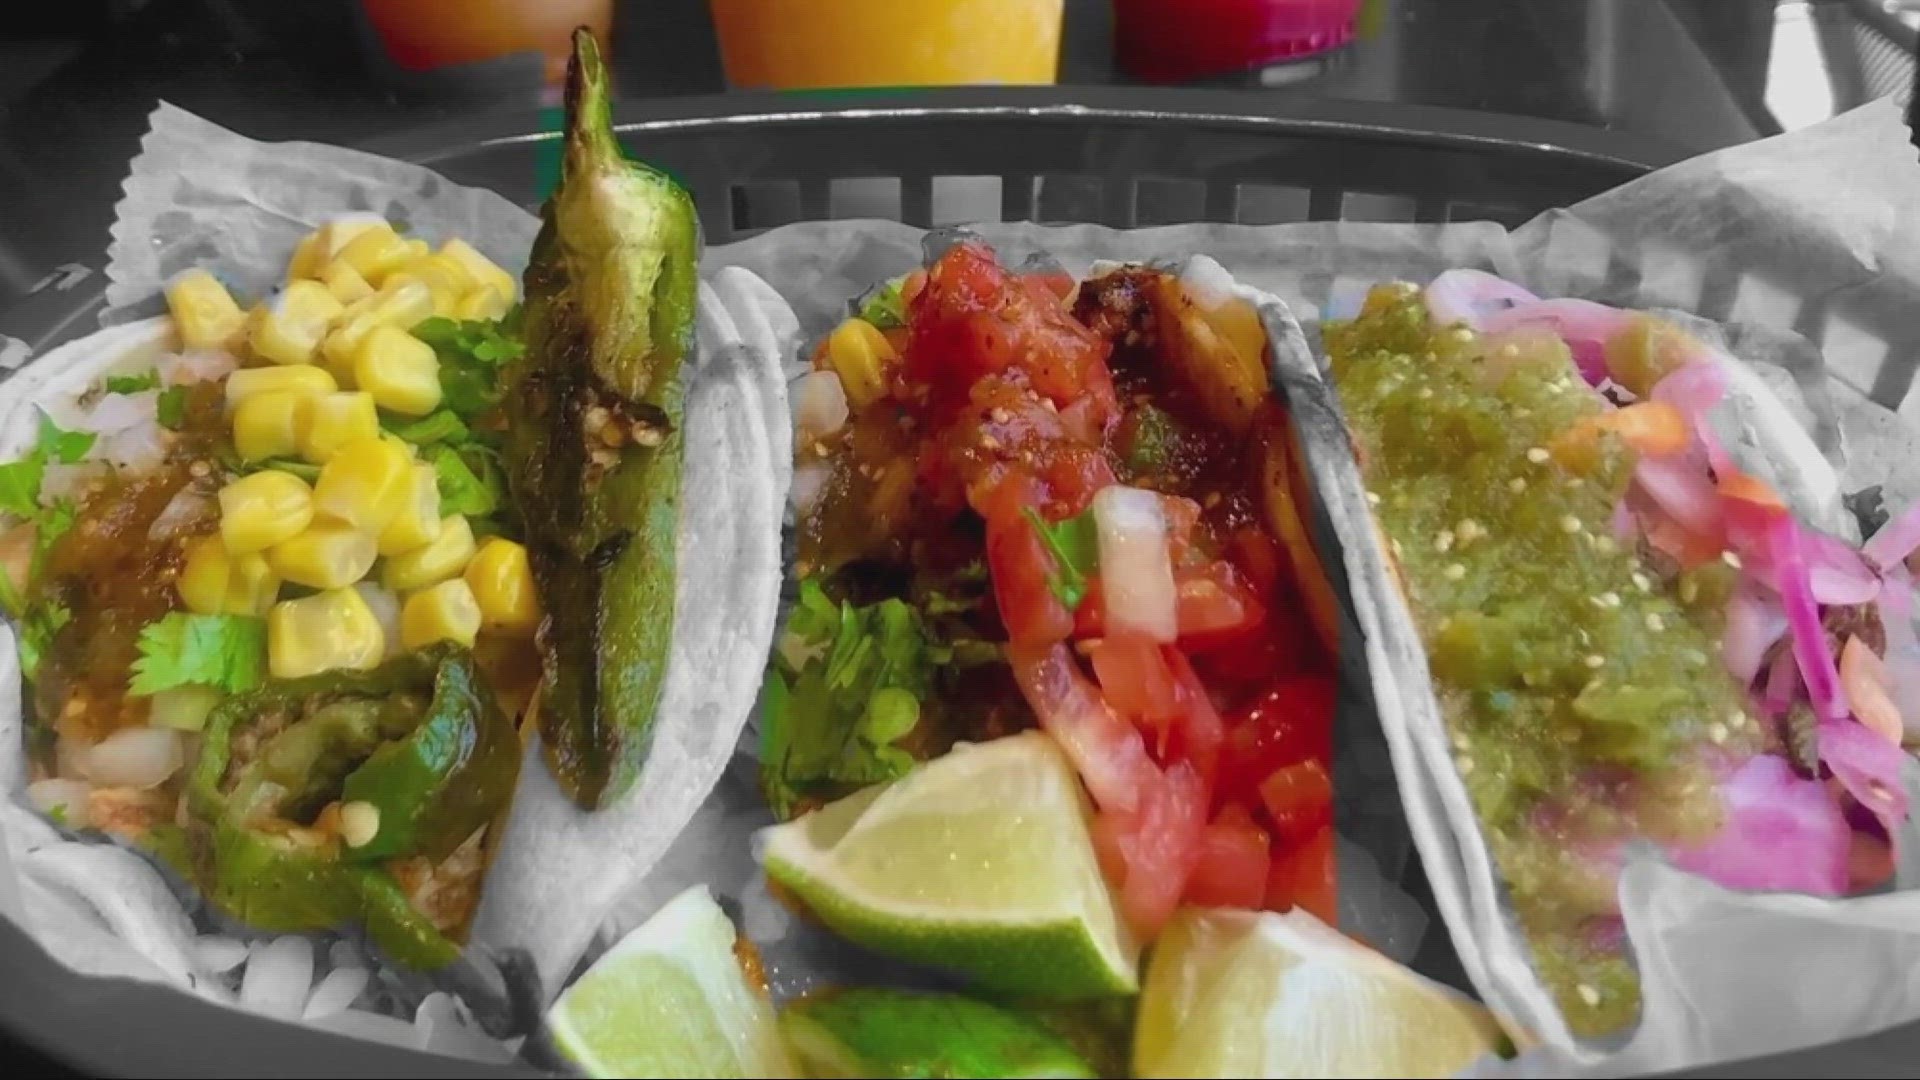 Here's the perfect place to stop for Cinco de Mayo in Northeast Ohio.